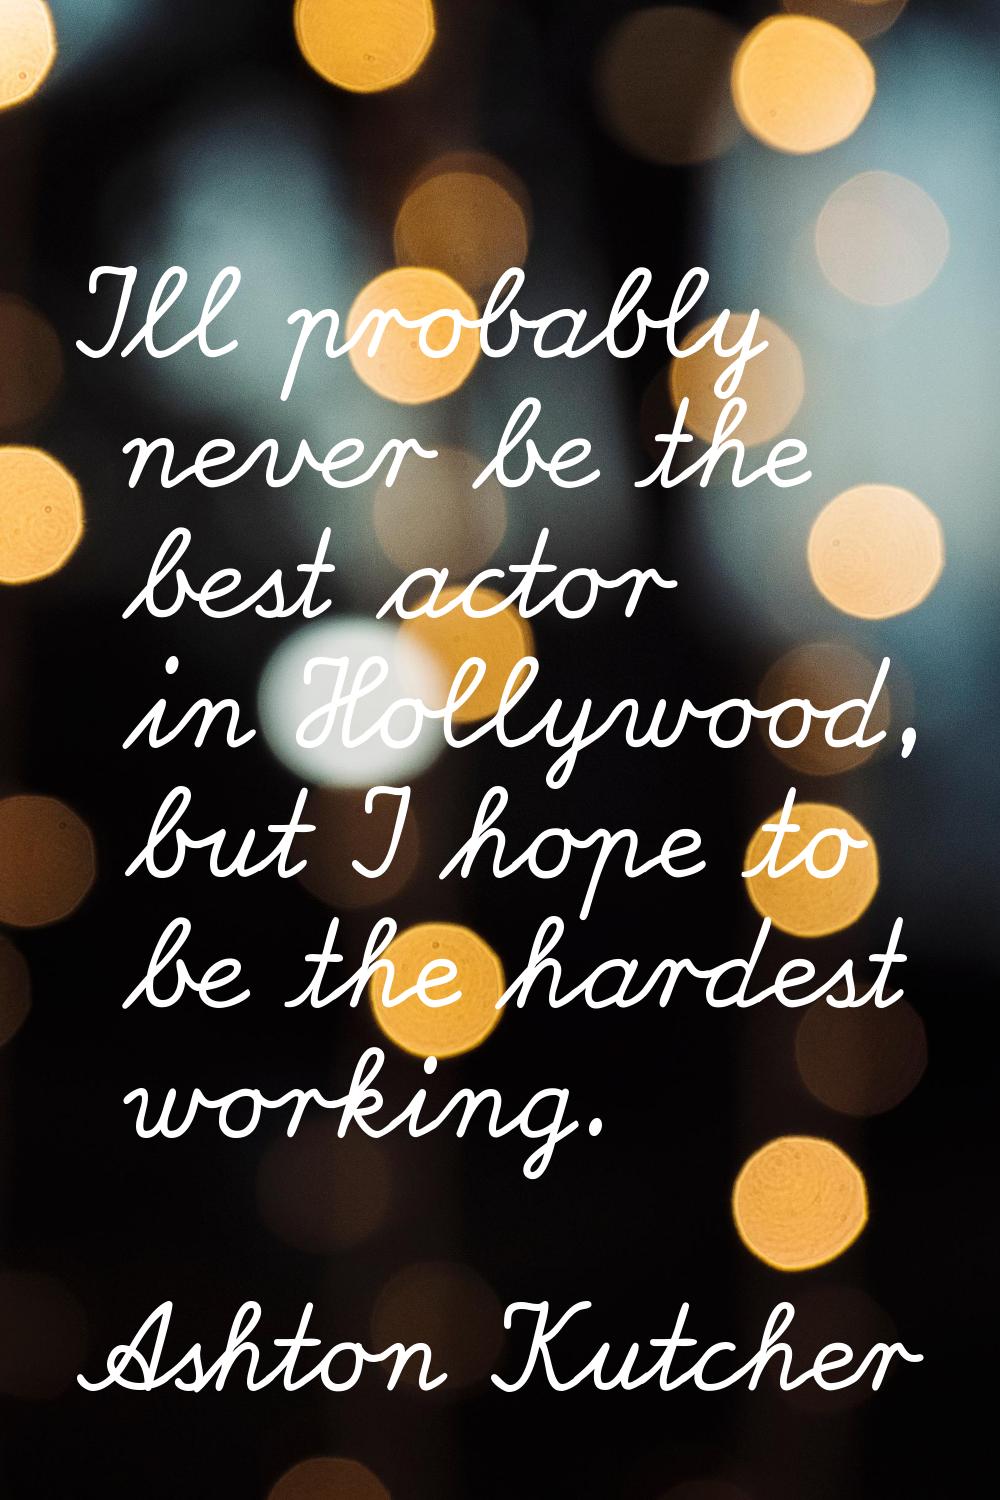 I'll probably never be the best actor in Hollywood, but I hope to be the hardest working.